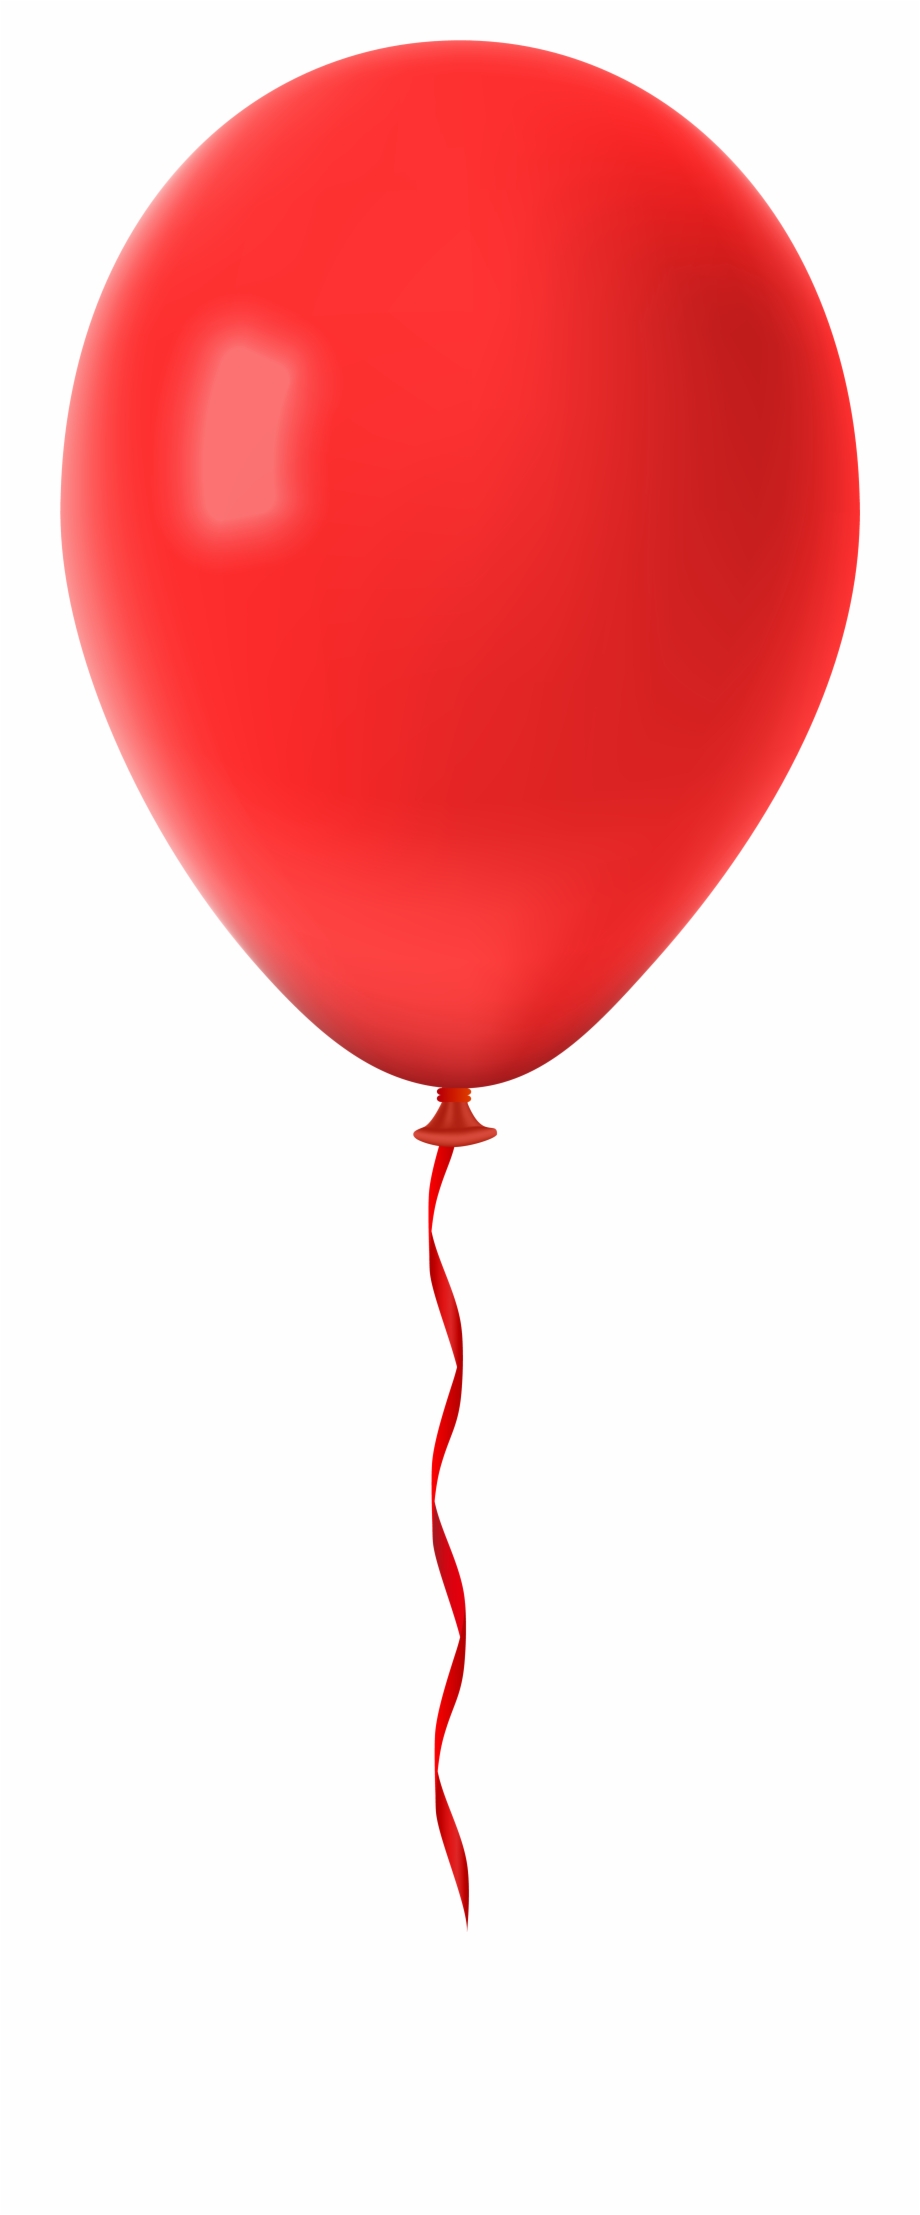 Red Balloons Png